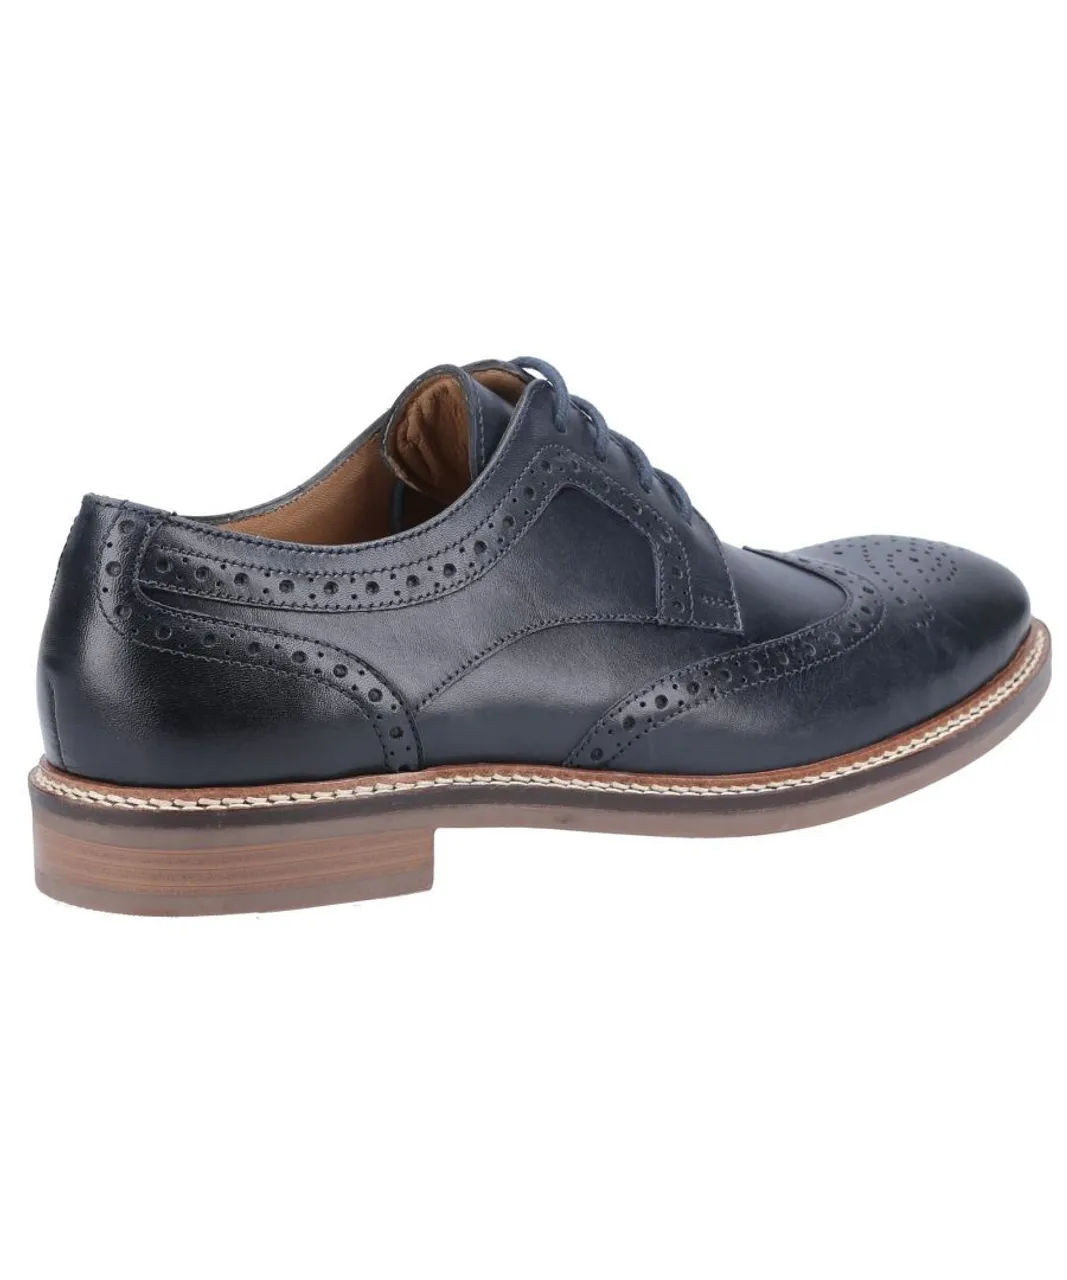 Hush Puppies Bryson Mens Lace Shoes - Navy Leather